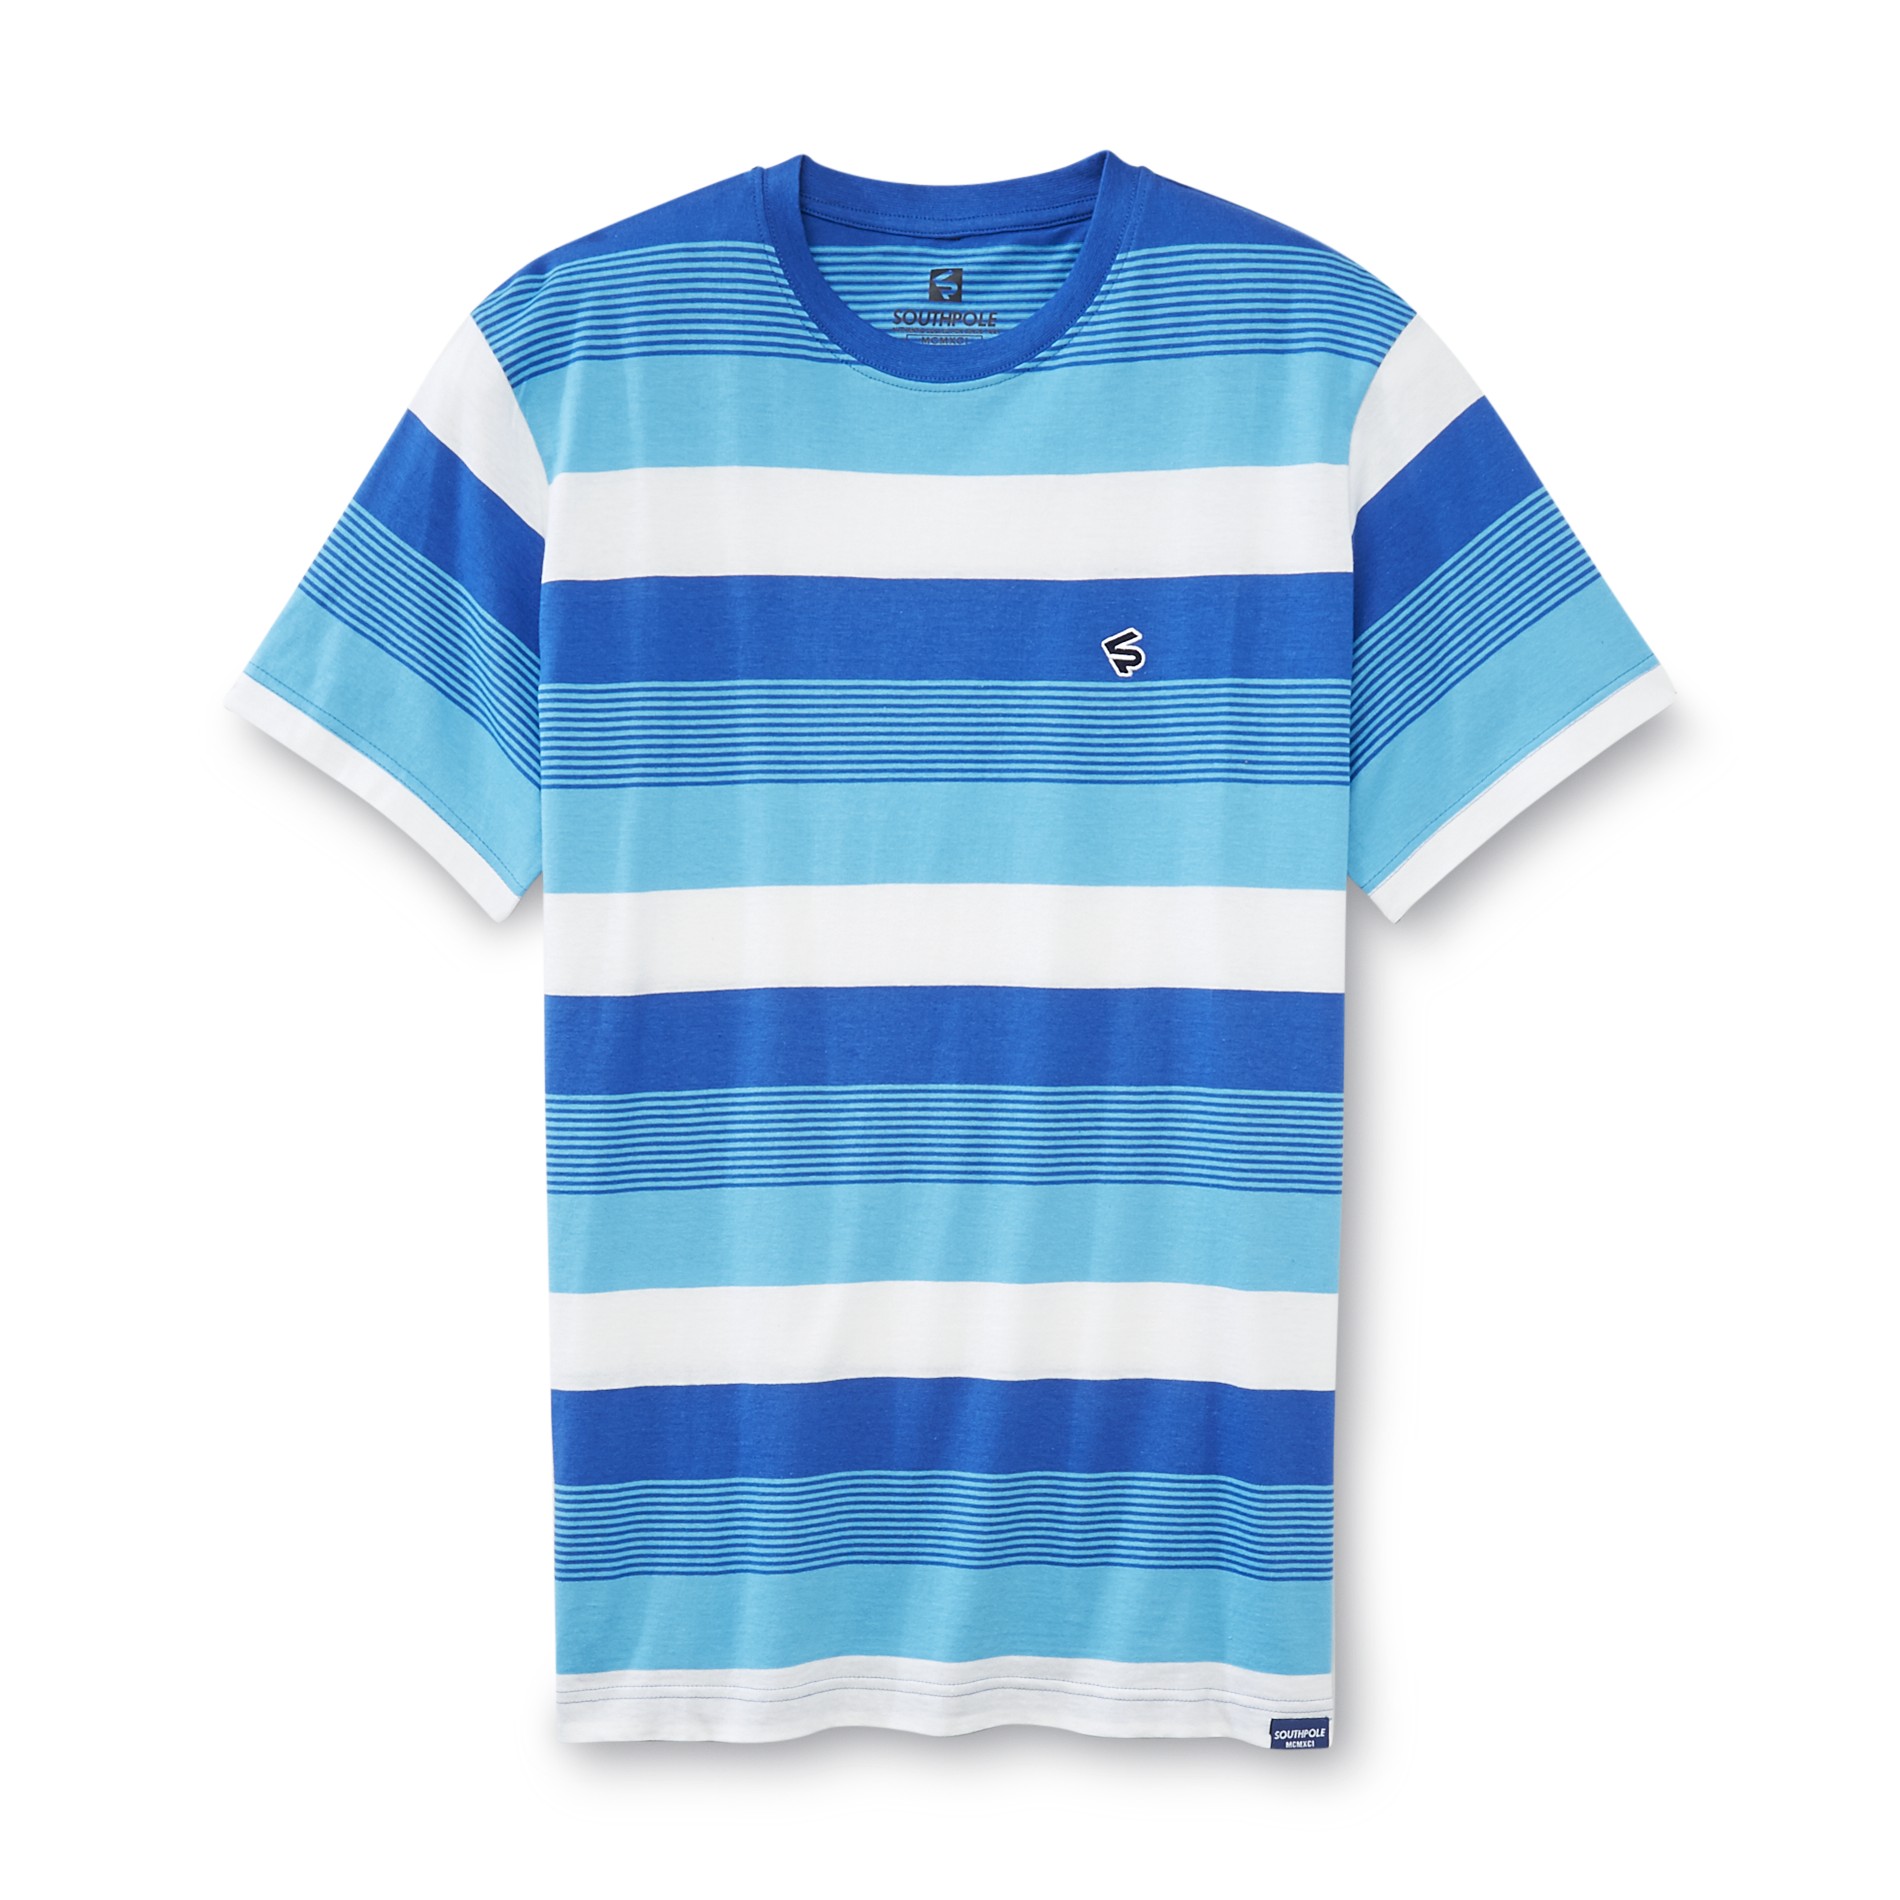 Southpole Young Men's Embroidered Logo T-Shirt - Striped